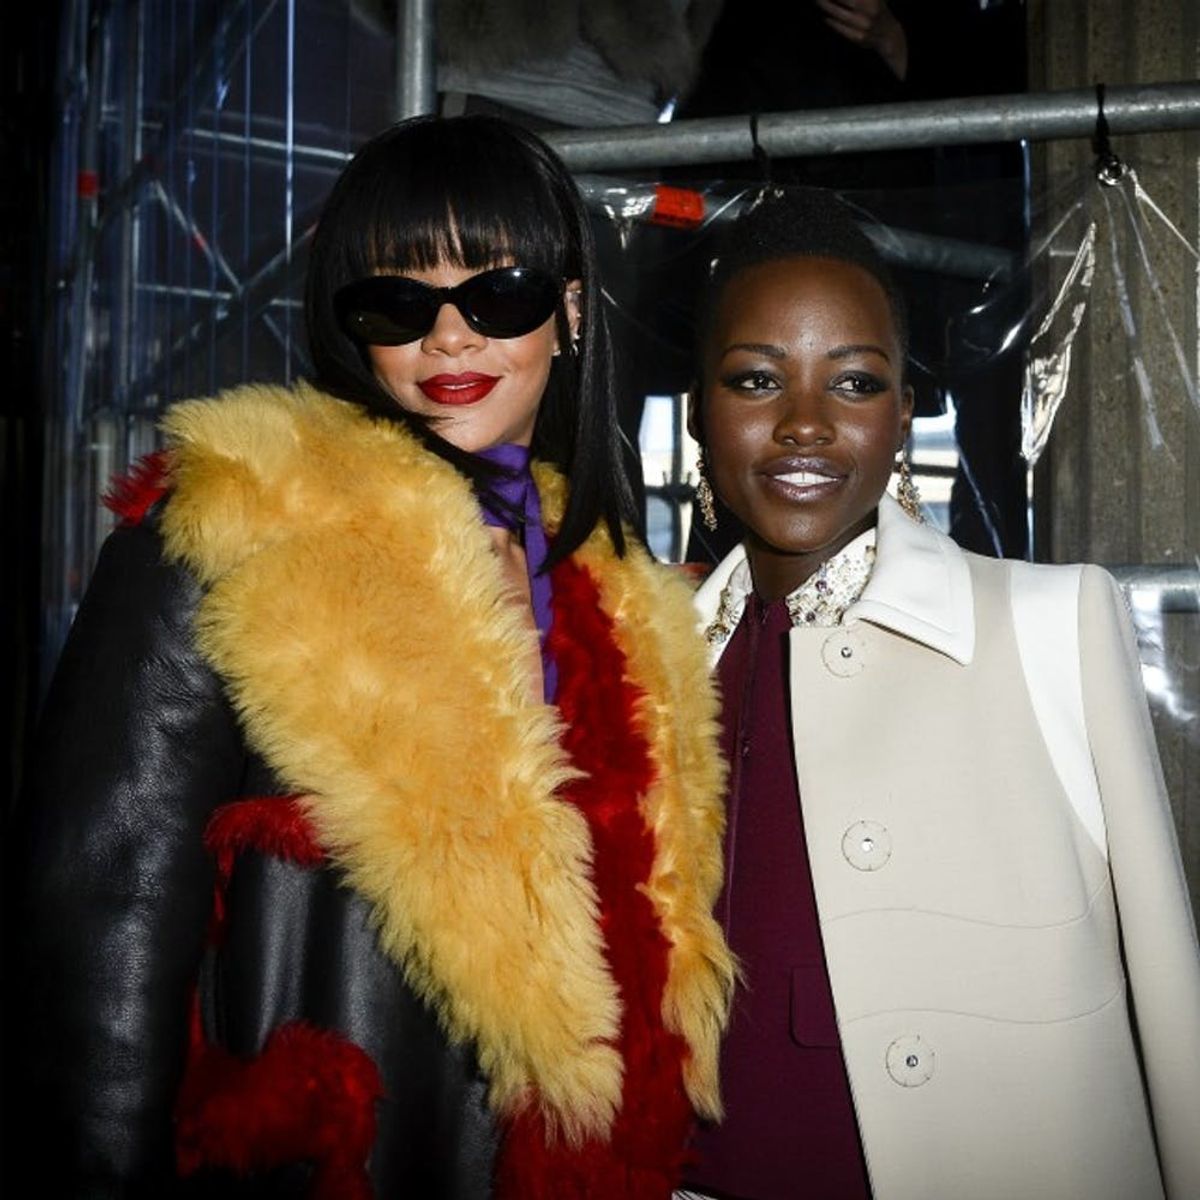 Here’s How a Fan Tweet About Rihanna and Lupita Nyong’o Became an Actual Movie Plot